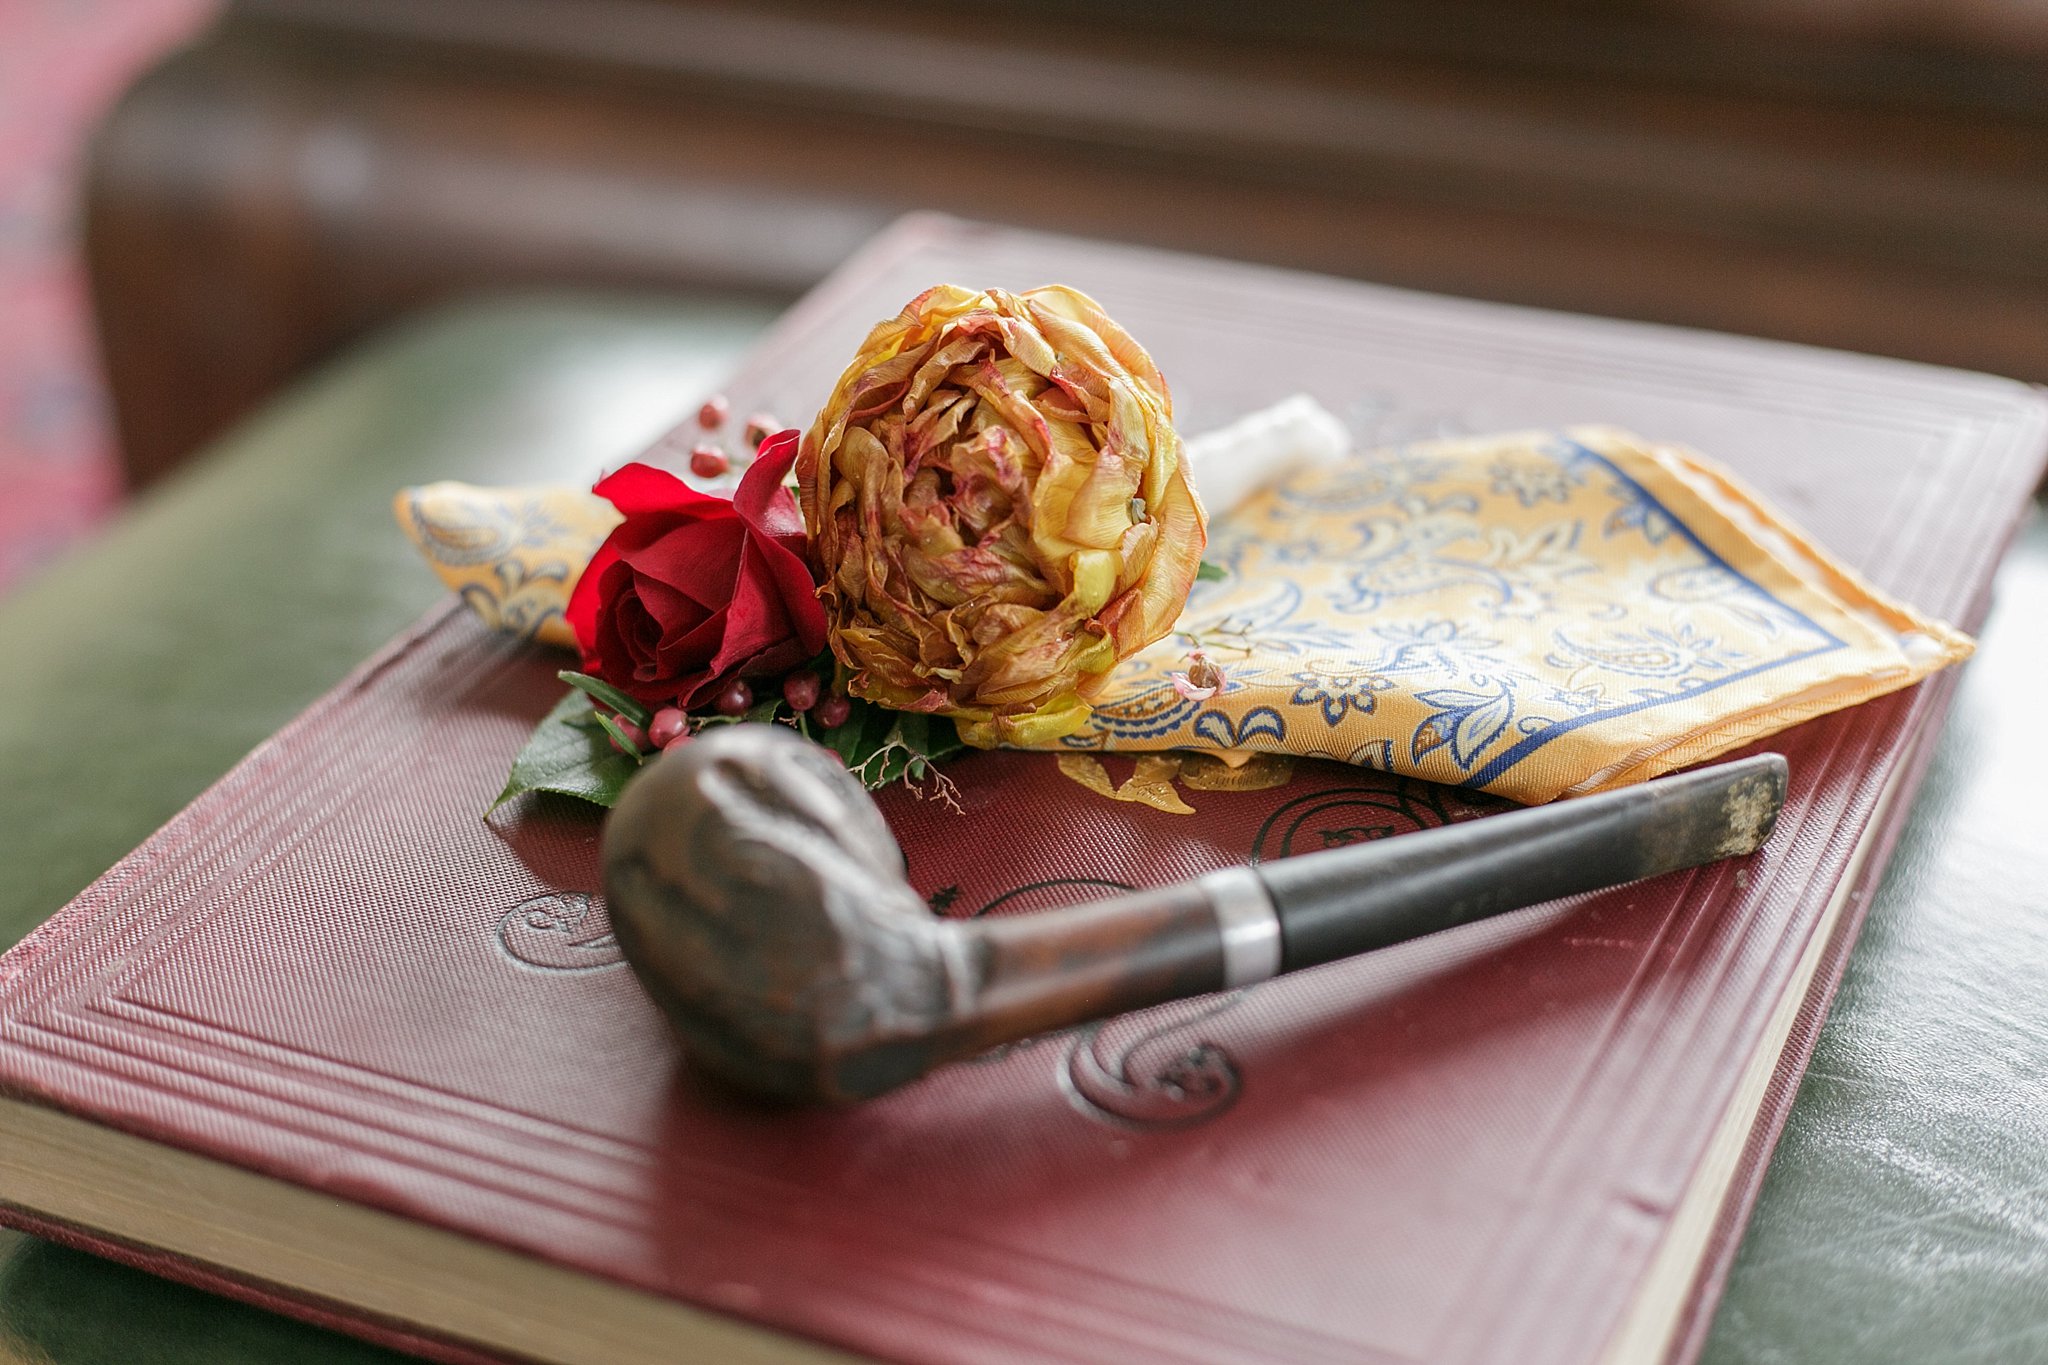 Groom accessories including a pipe, handkerchief, and boutonniere.